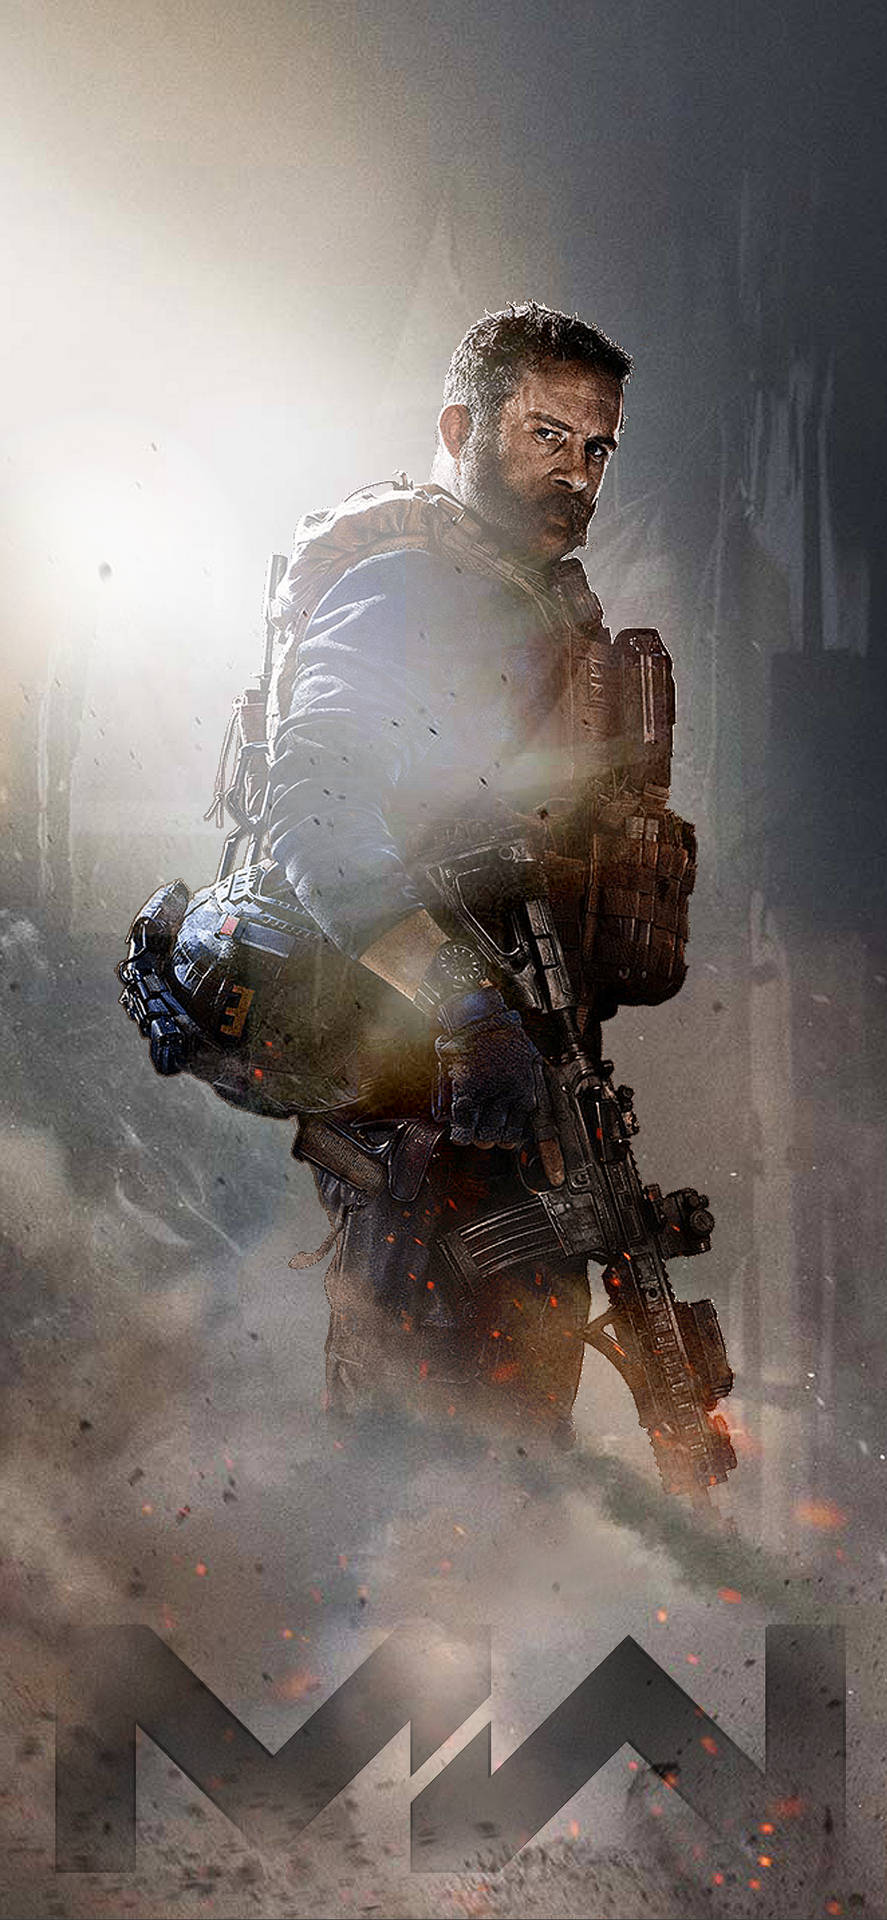 Cool Call Of Duty Modern Warfare iPhone Captain Price Wallpaper